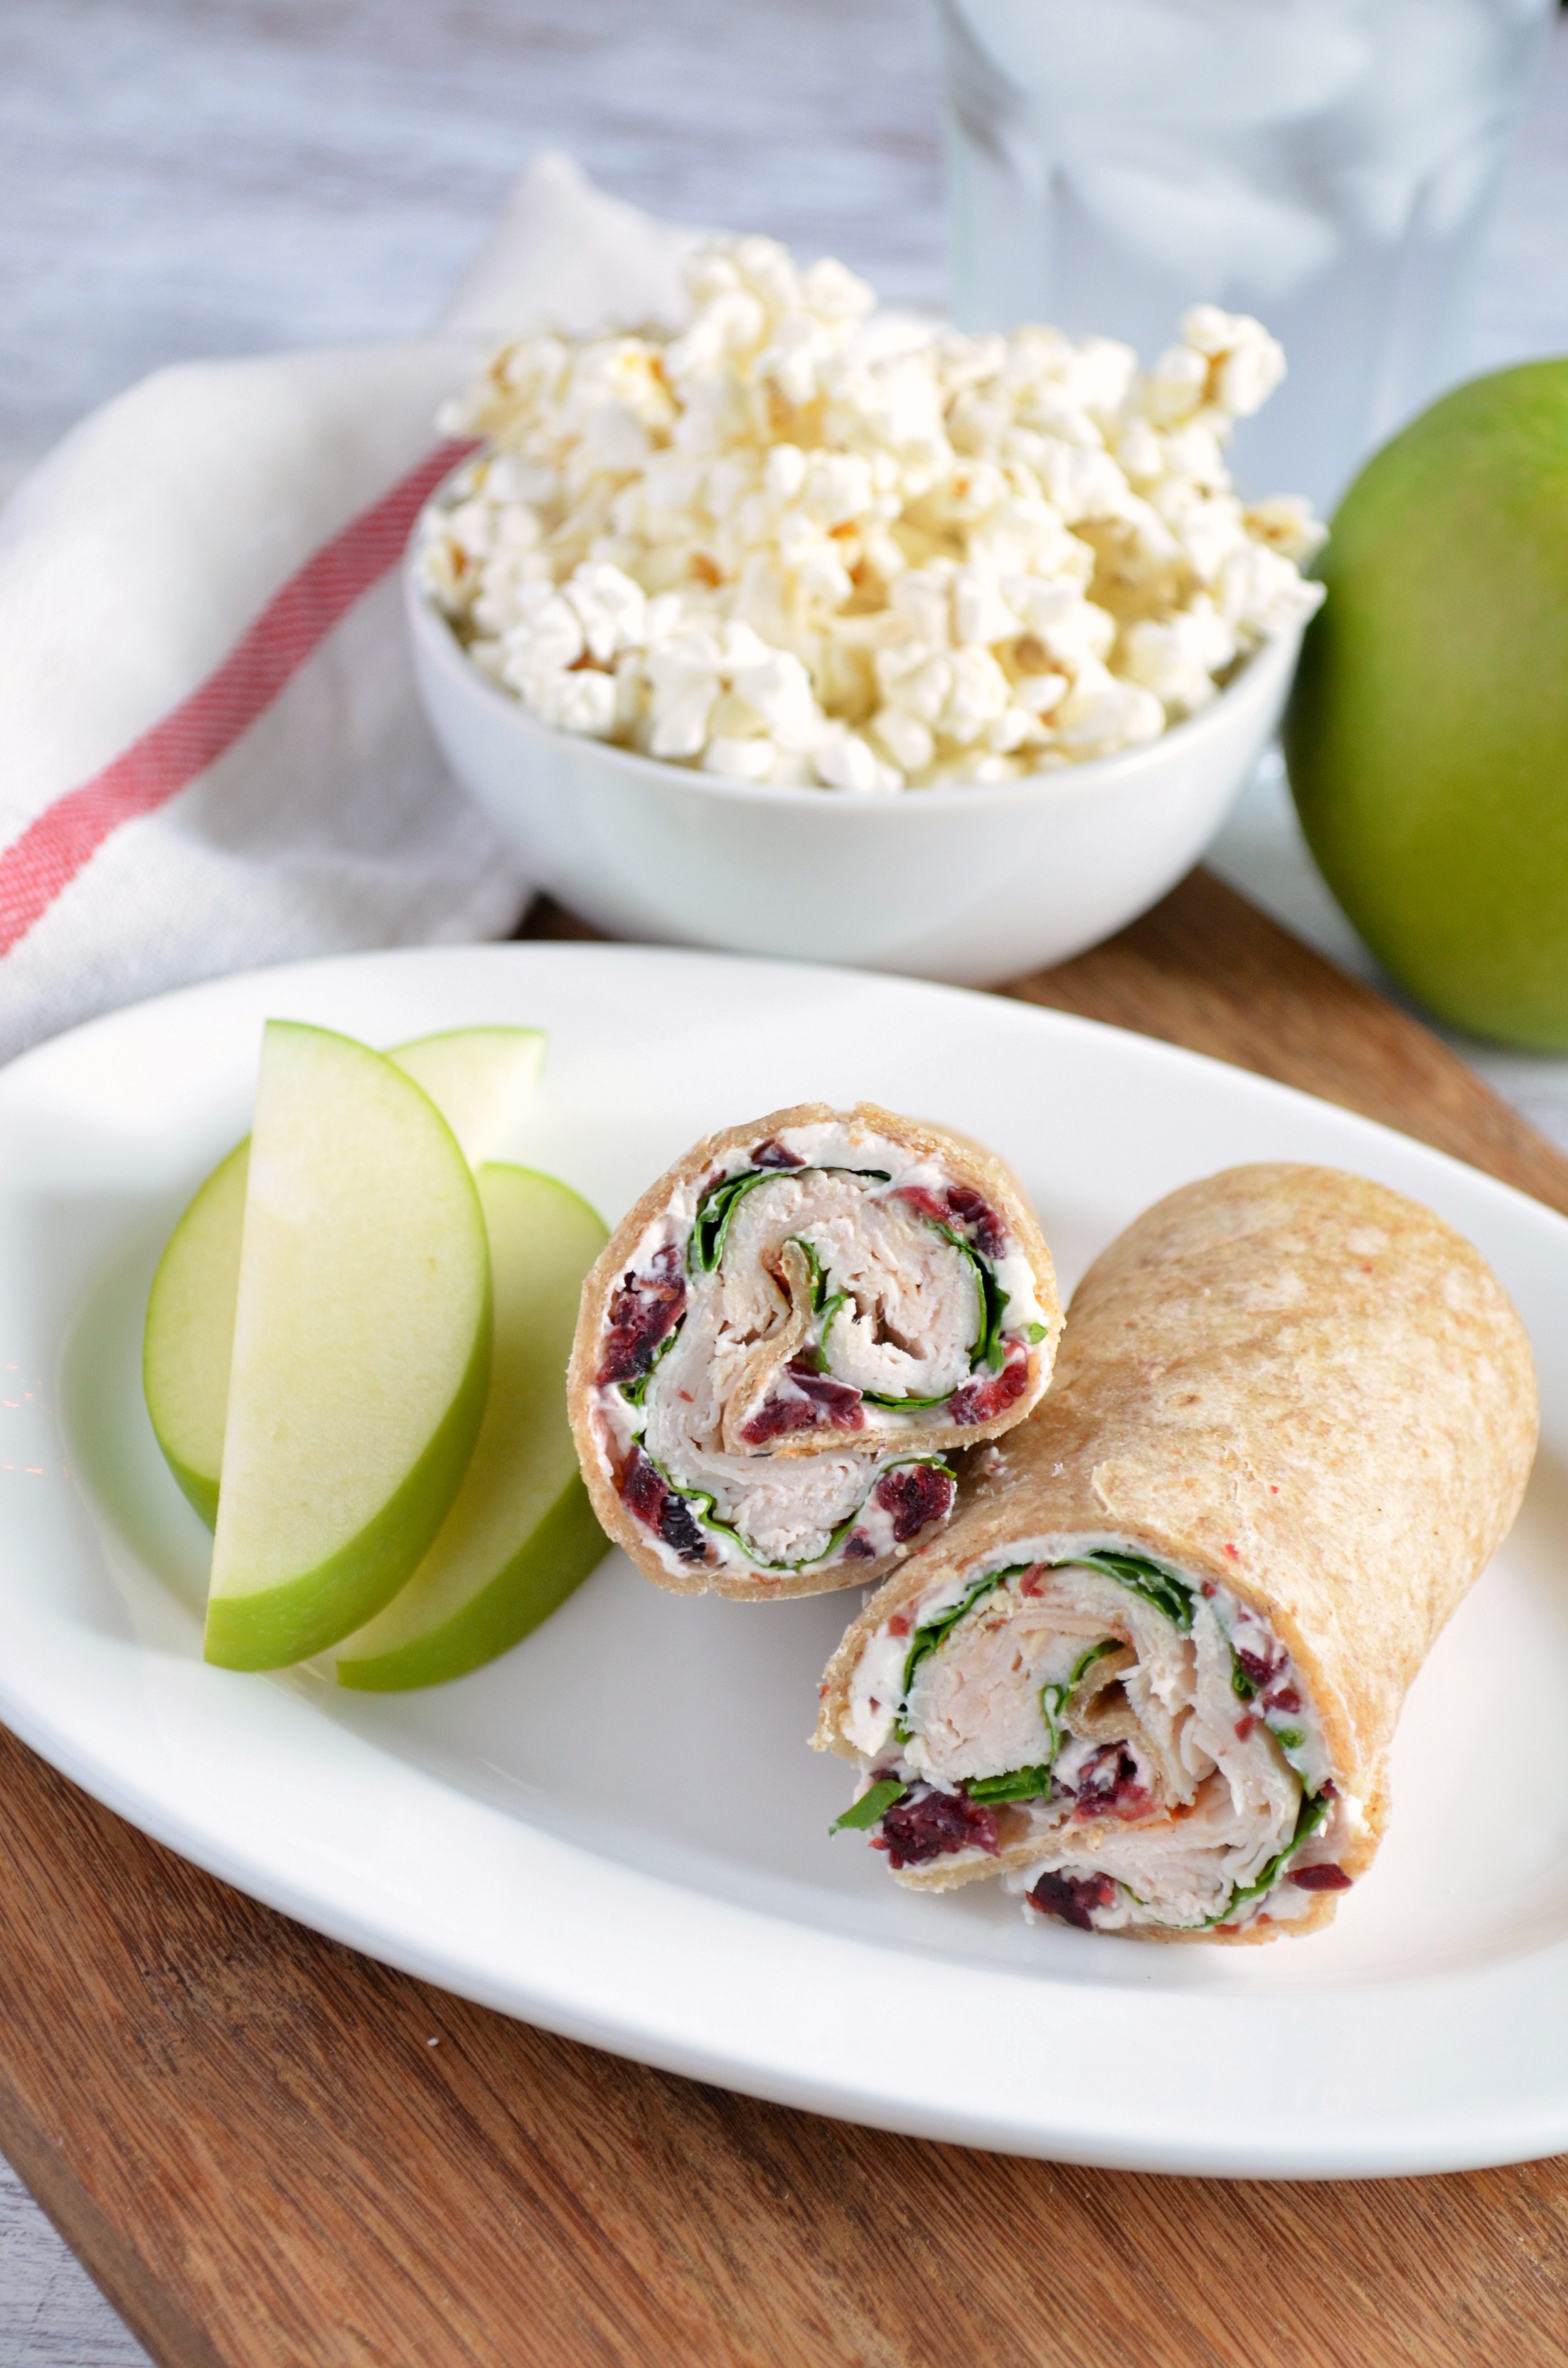 Turkey, Spinach and Cranberry Wraps